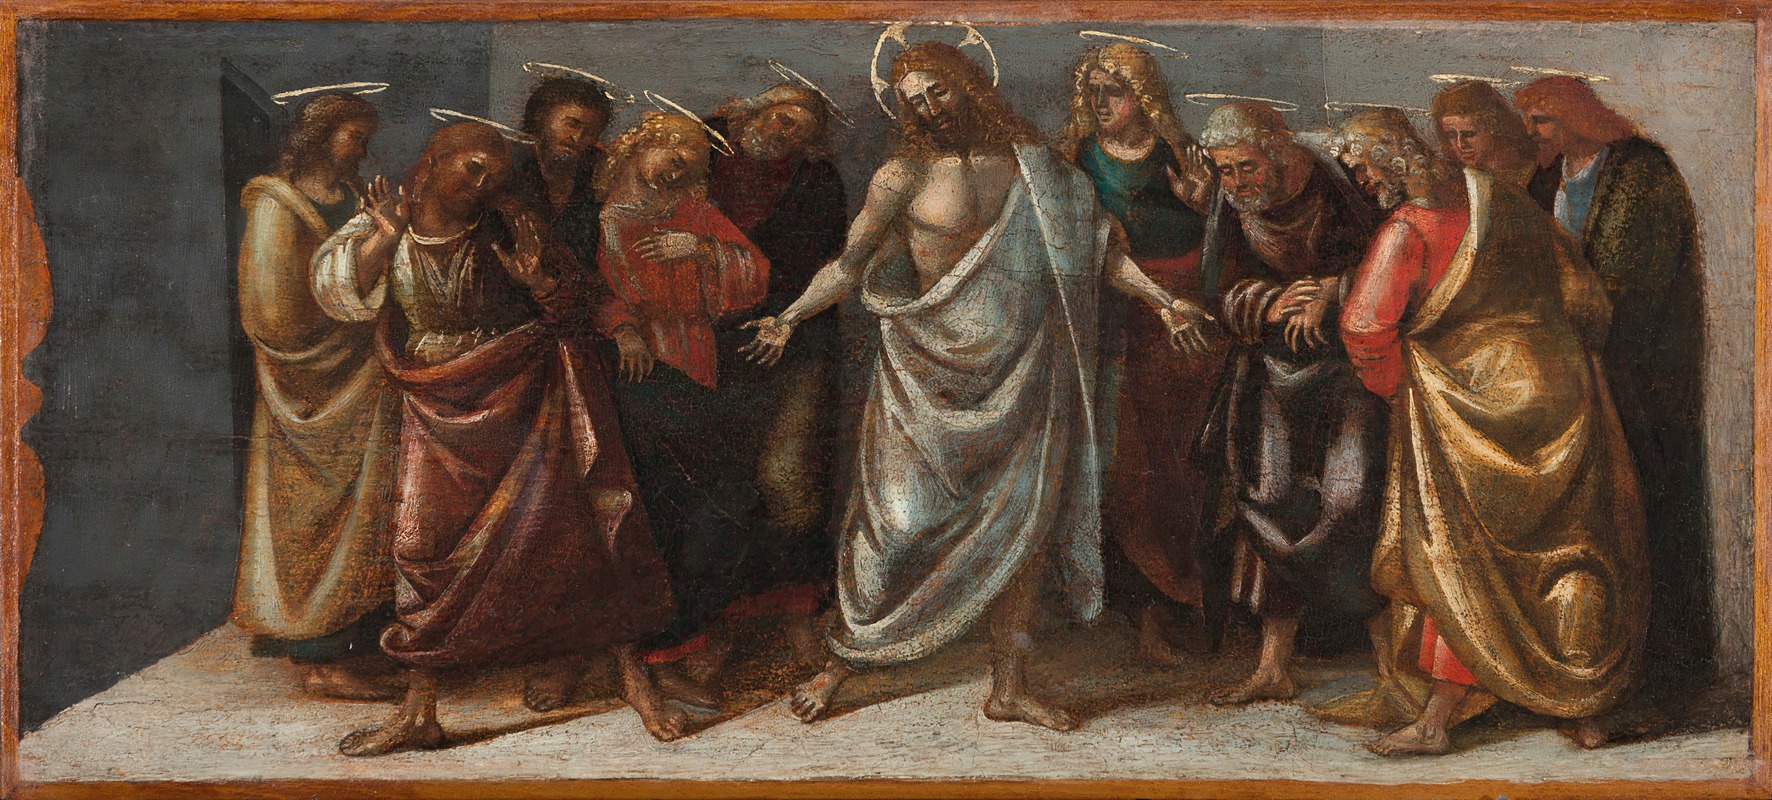 Luca Signorelli - The Resurrected Christ Appearing to His Disciples